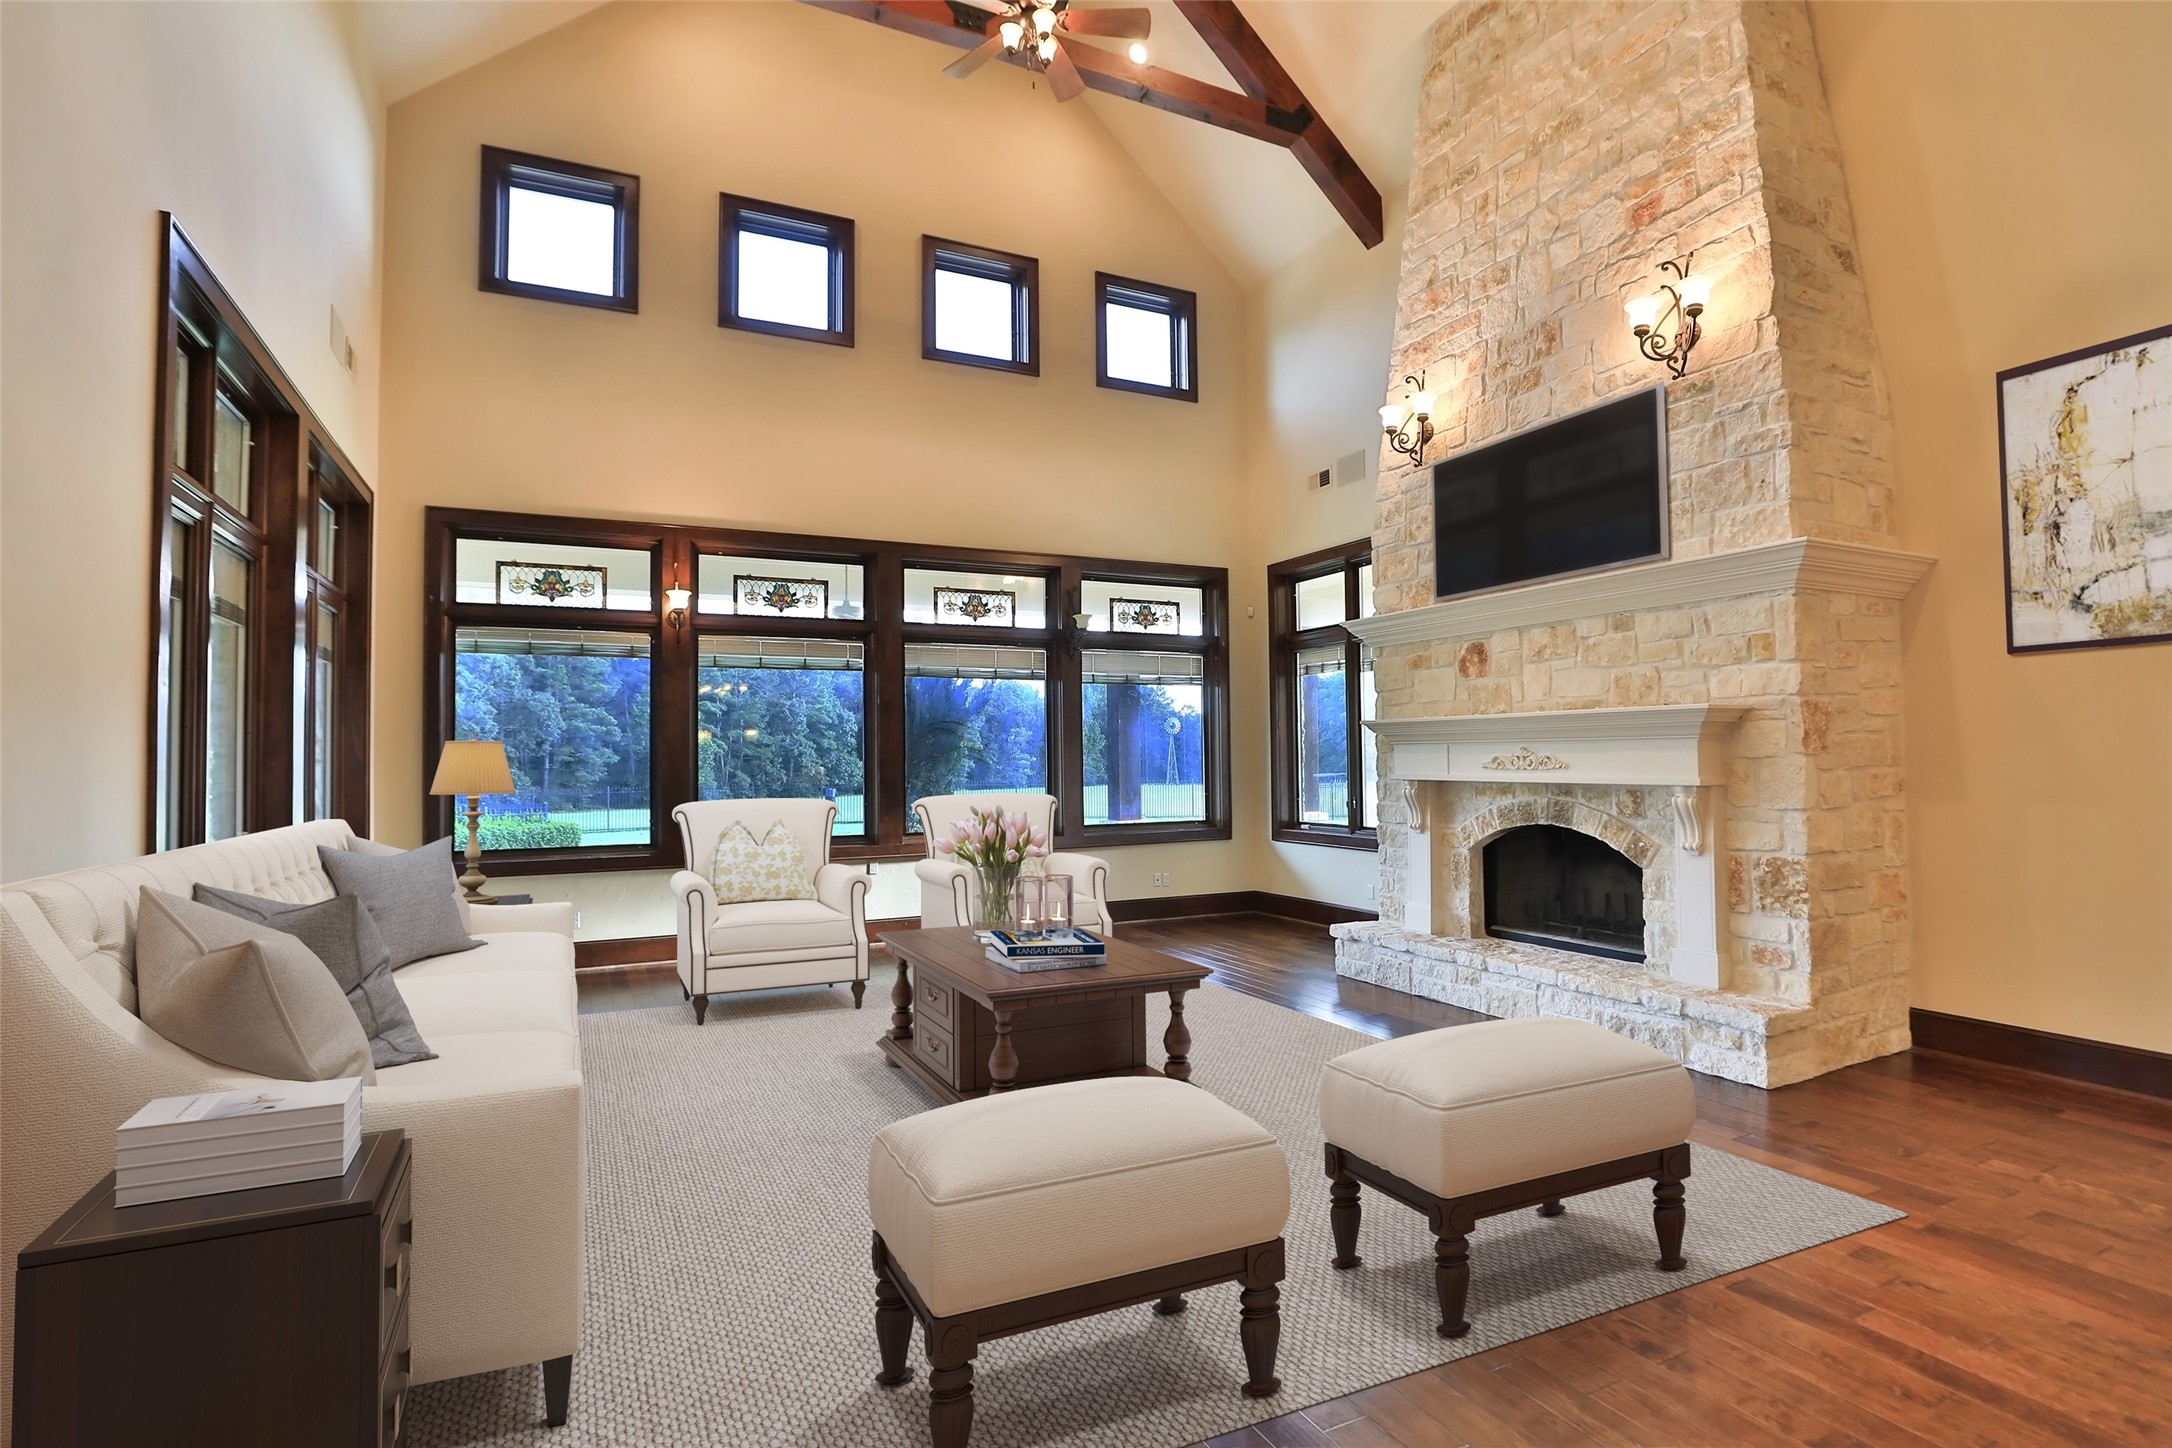 The gigantic family room features a wall of windows that overlook the amazing outdoors. Imagine looking out the window and seeing nothing but your land!